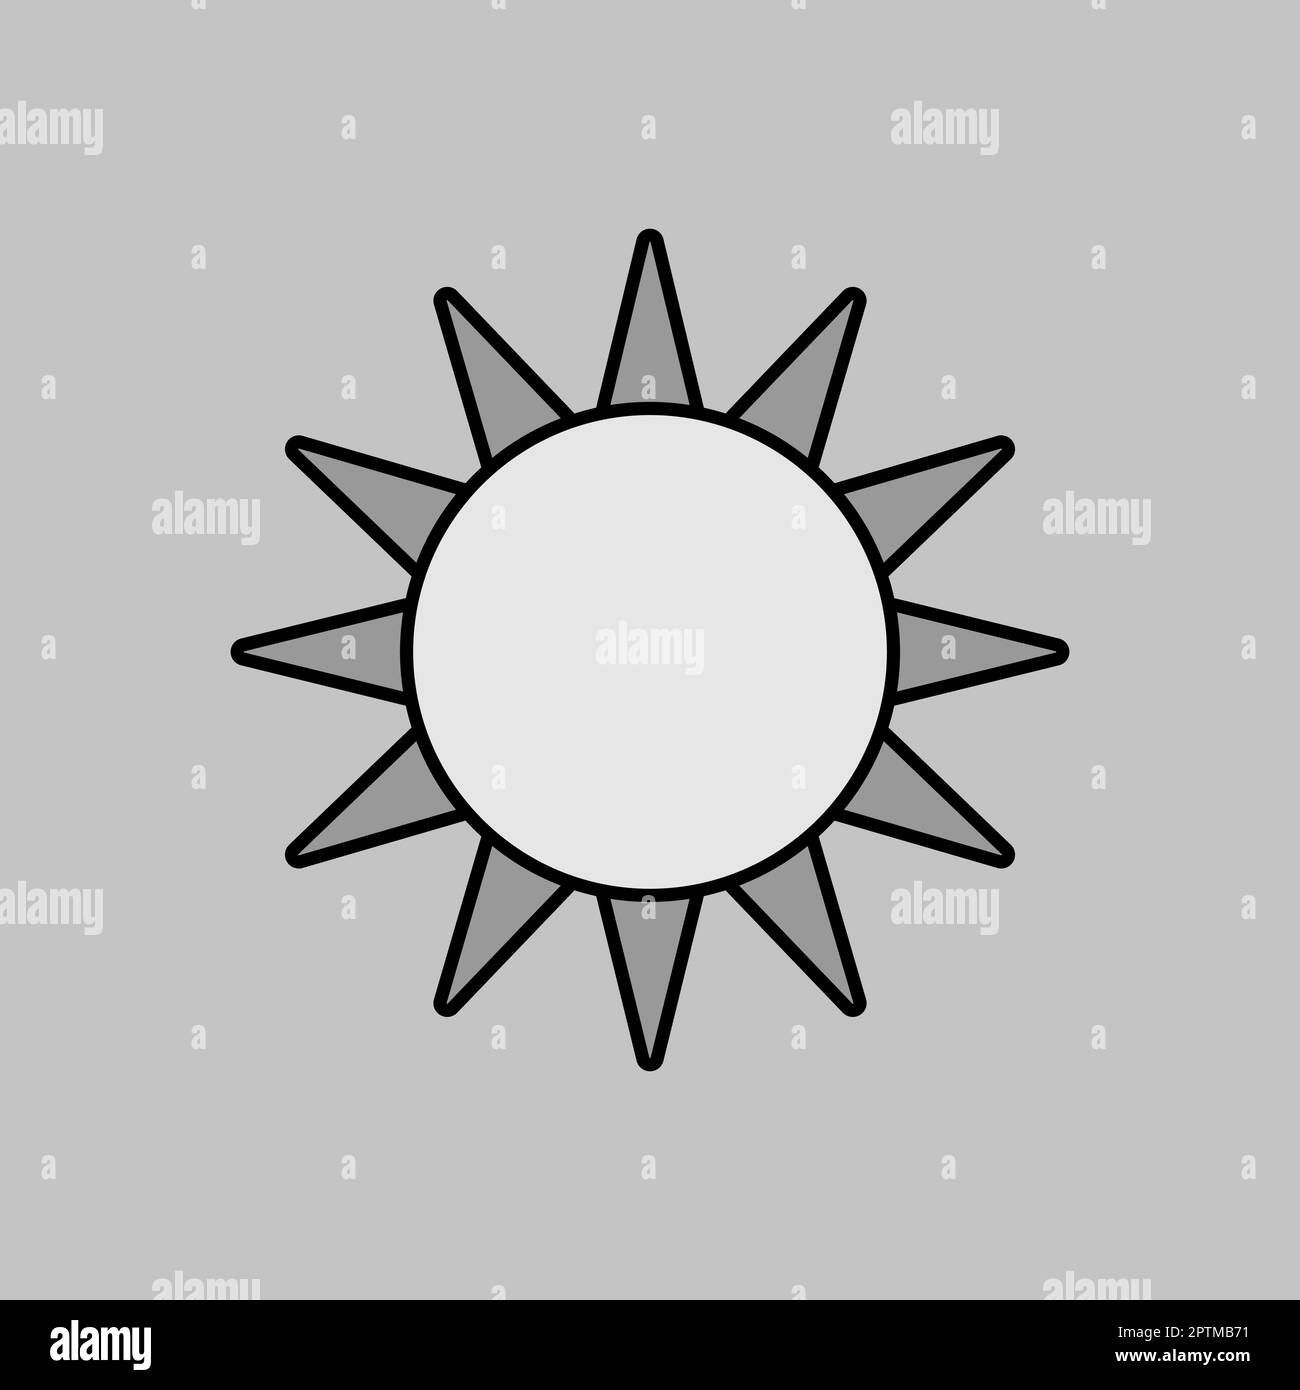 Sun outline Black and White Stock Photos & Images - Alamy